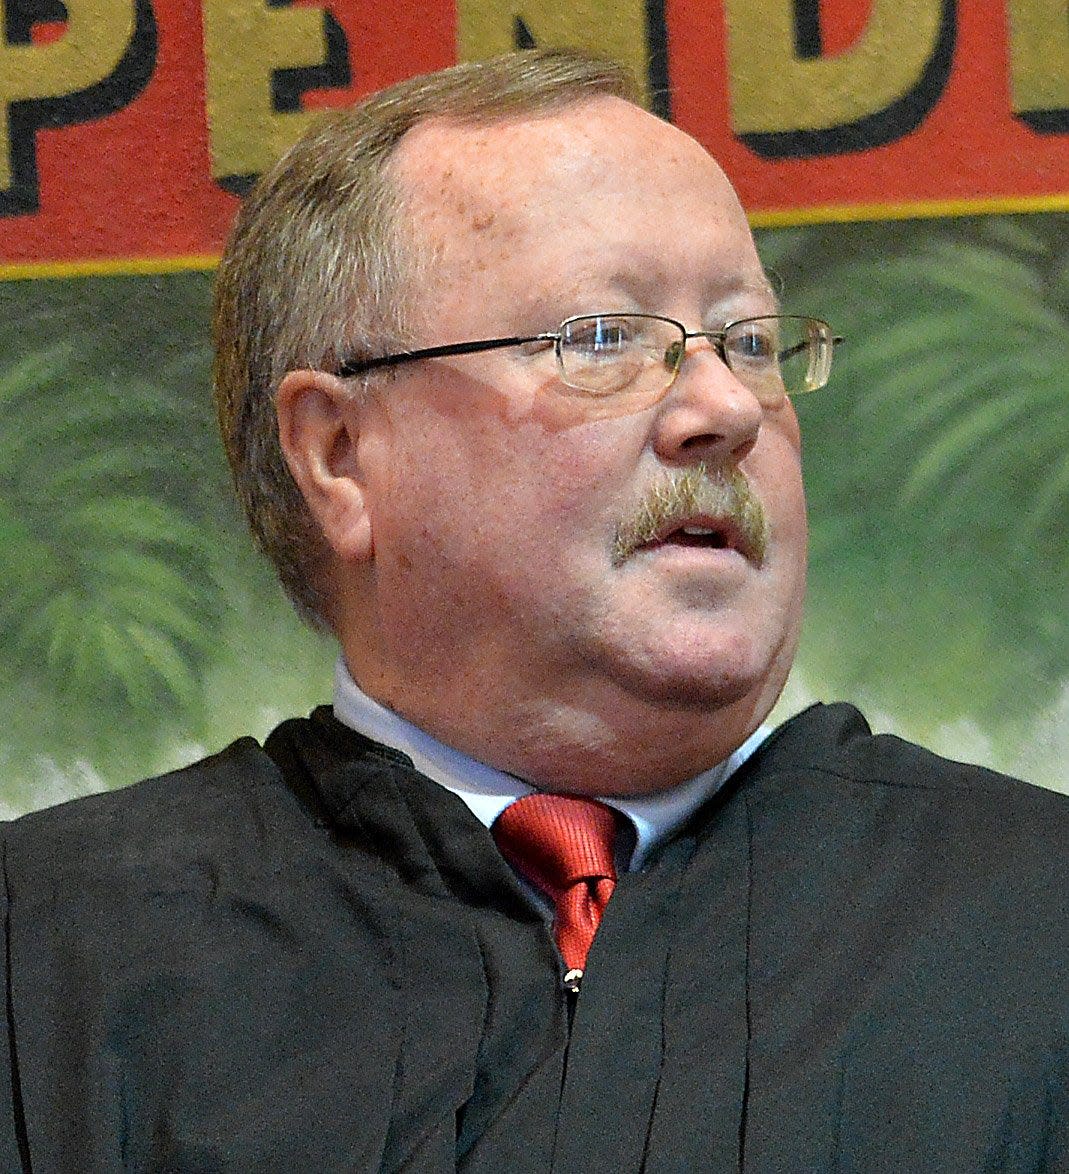 Erie County President Judge Joseph M. Walsh III led the development of the proposal to increase compensation and add benefits for lawyers the county hires to represent indigent clients.